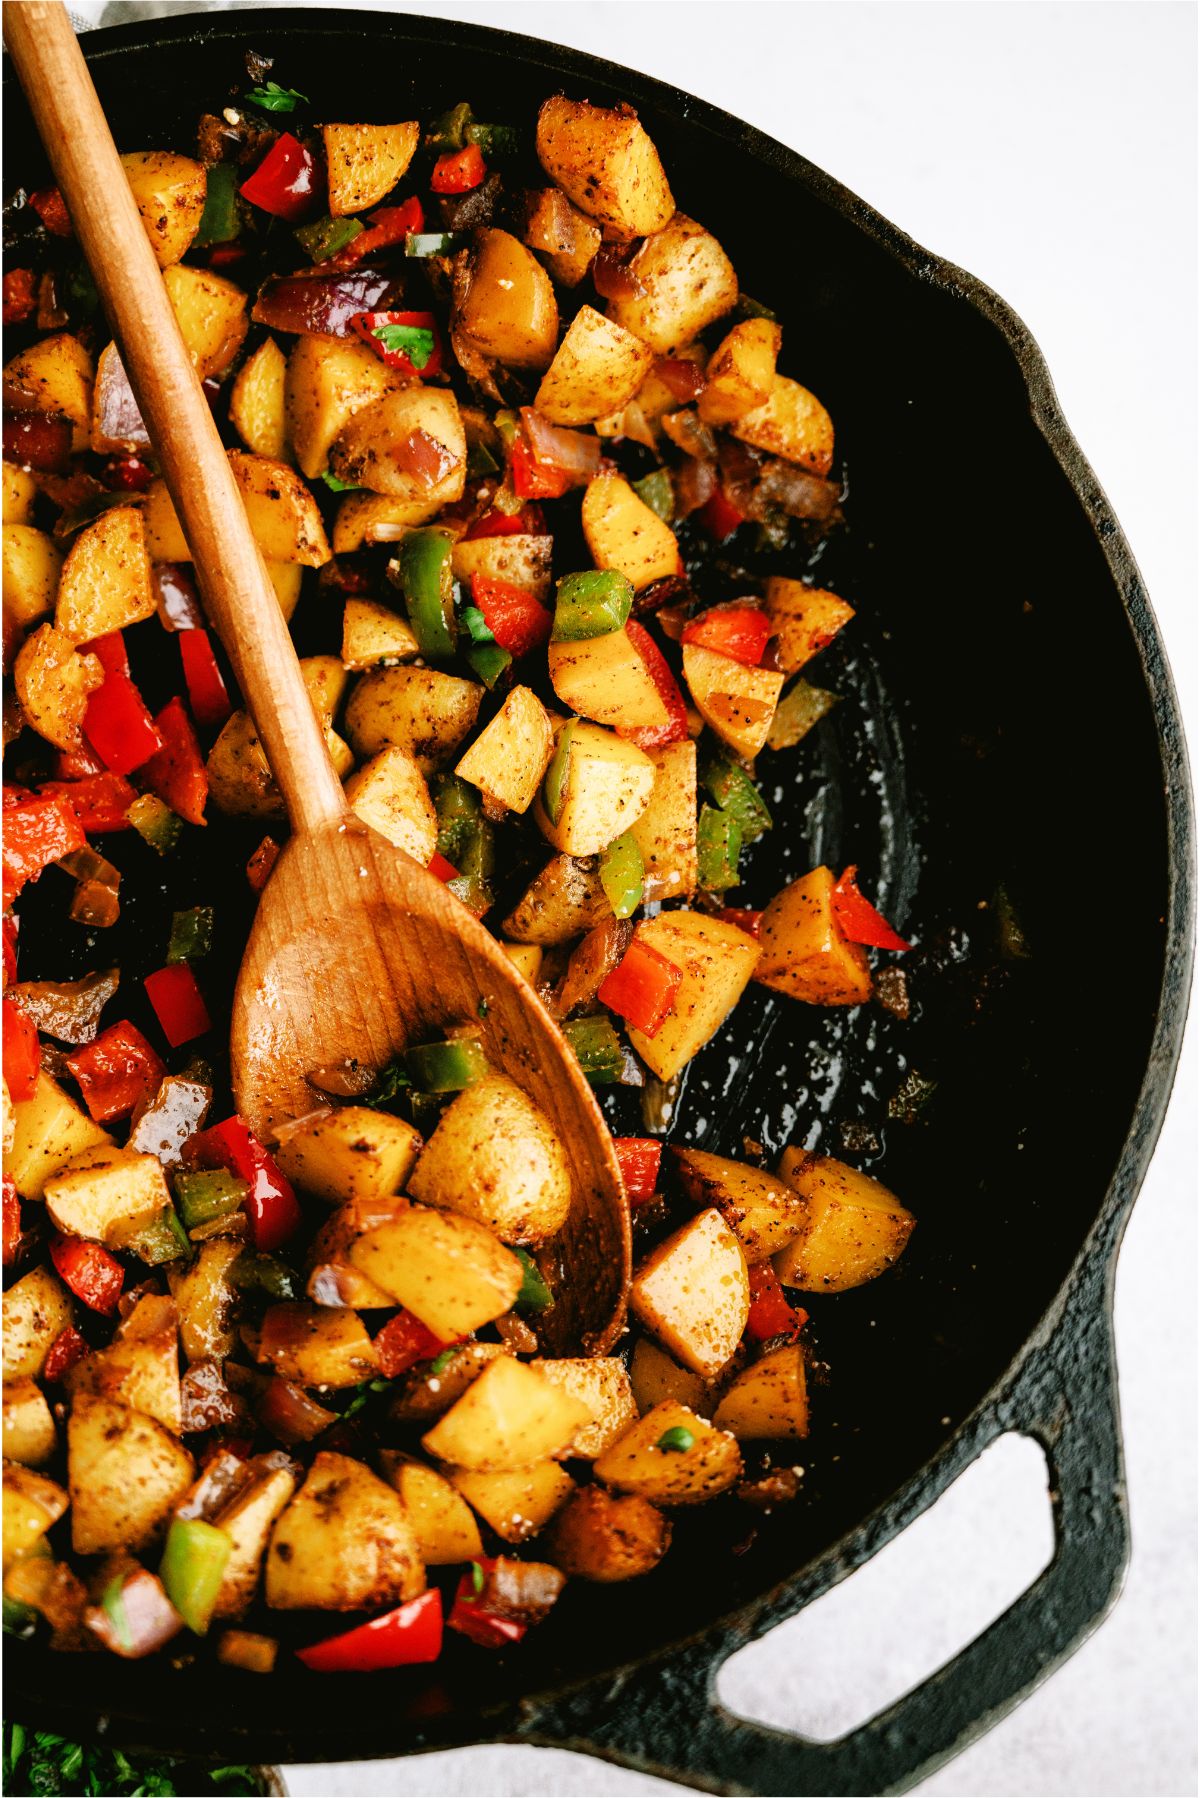 Breakfast Potatoes and veggies in a skillet with a wooden spoon